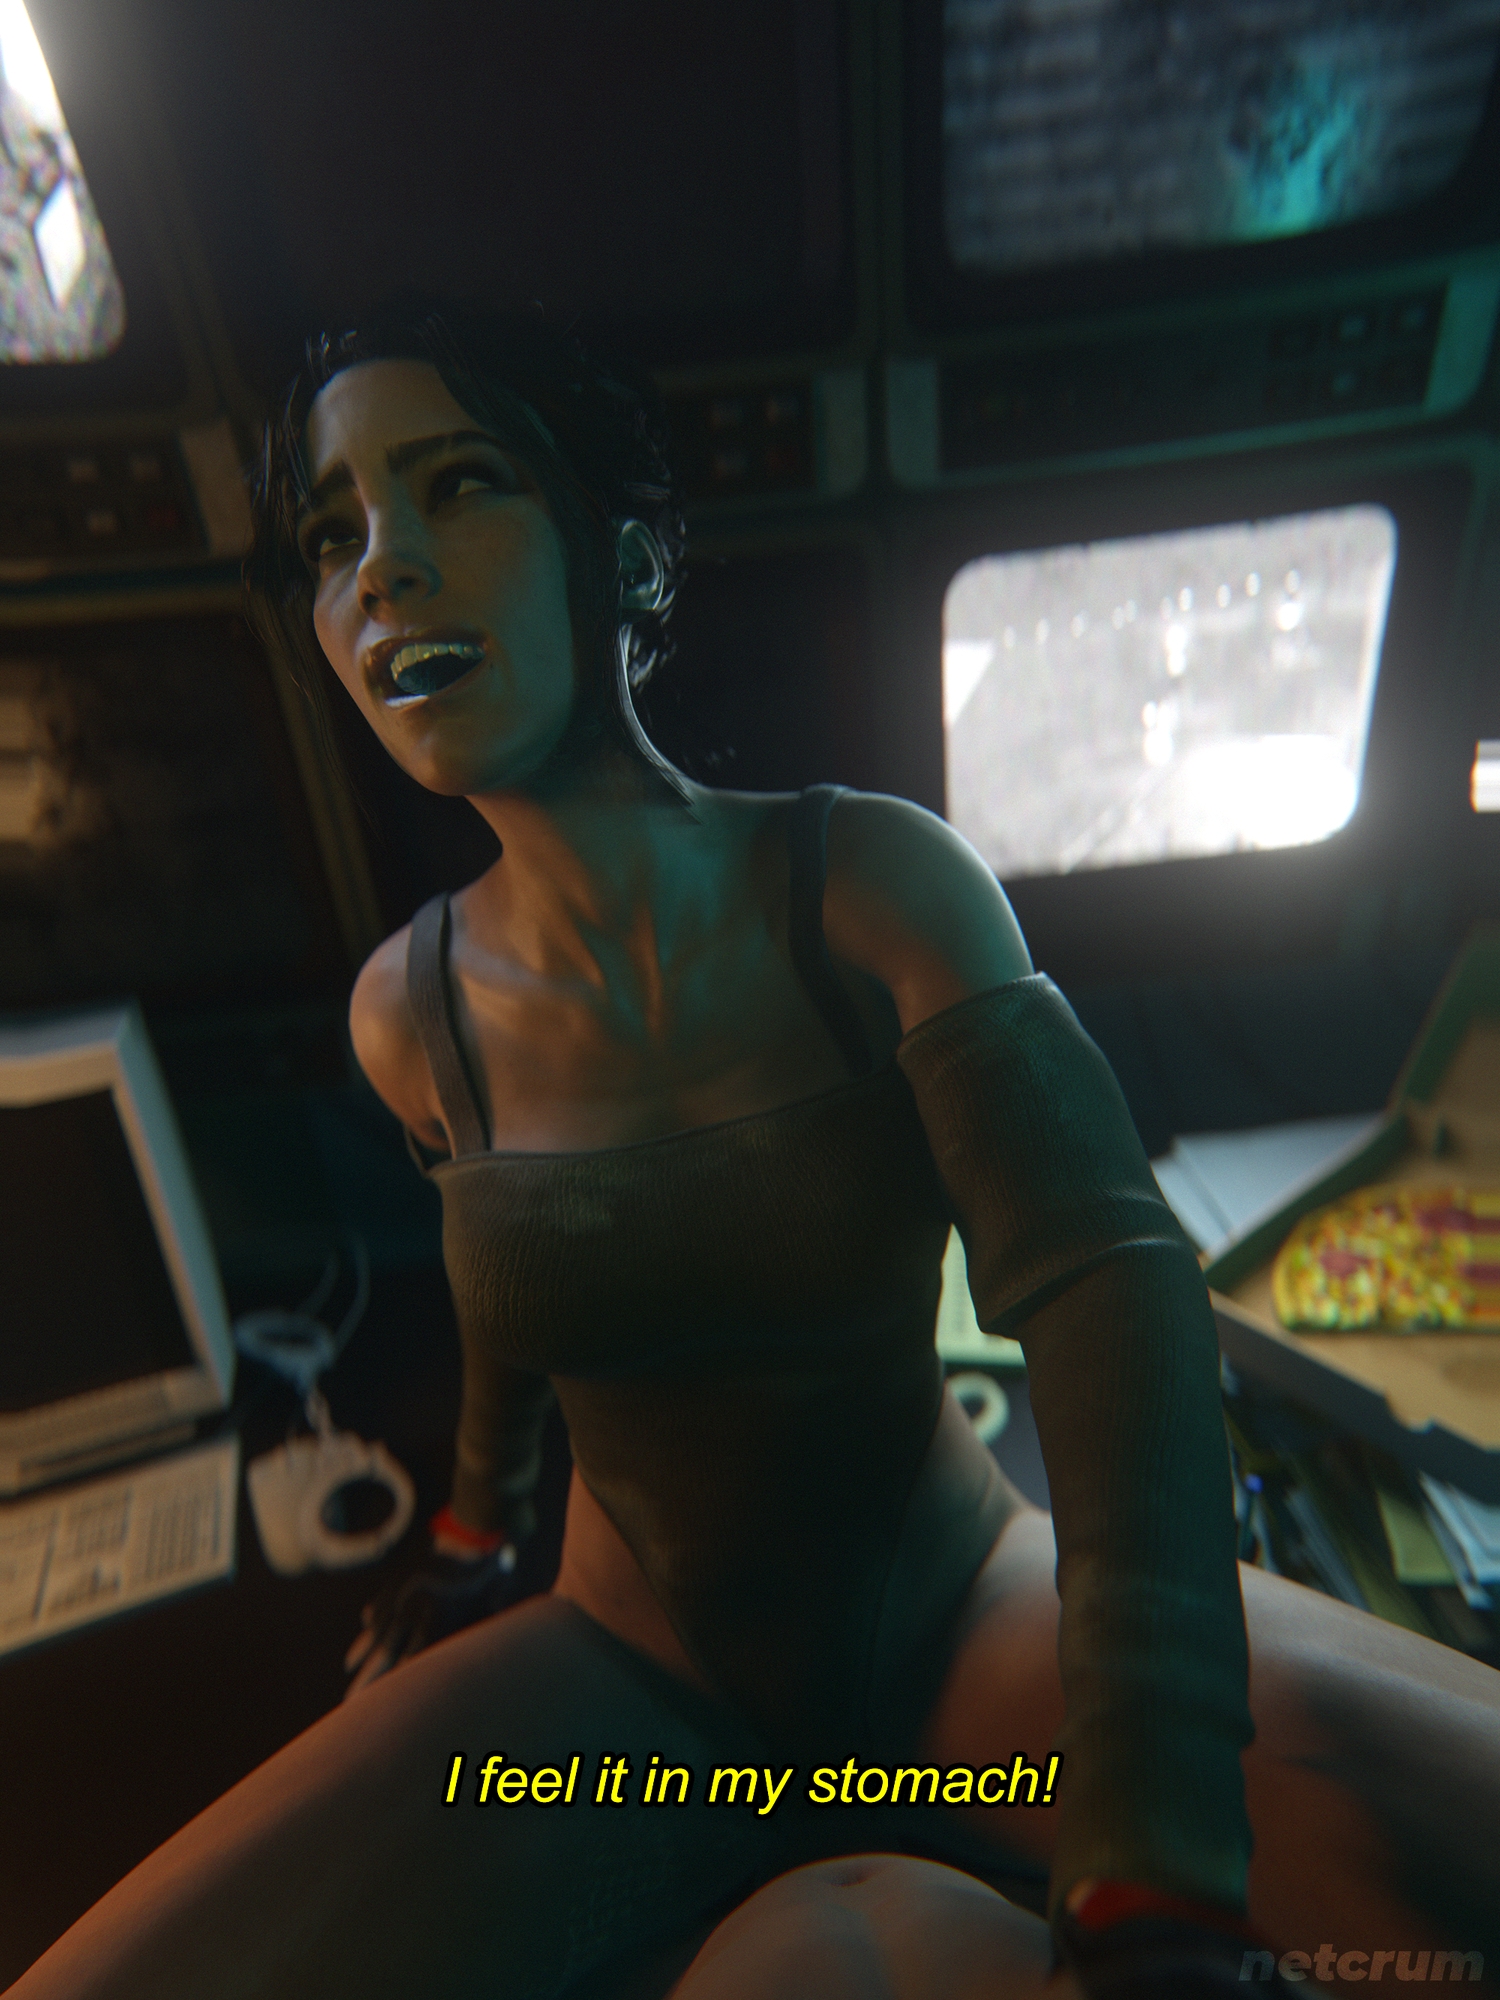 Panams Alternate Mission Panam Palmer Cyberpunk2077 Cyberpunk Big Tits Big Cock Big Breasts Big Dick Big penis Big Boobs Natural Boobs Natural Tits Natural Breast Submissive 1boy1girl Smile Open legs Wrapped Legs Interracial Partially_clothed Clothing Clothed Office Vaginal Vaginal Penetration Vaginal Sex Vaginal Insertion Cleavage 6